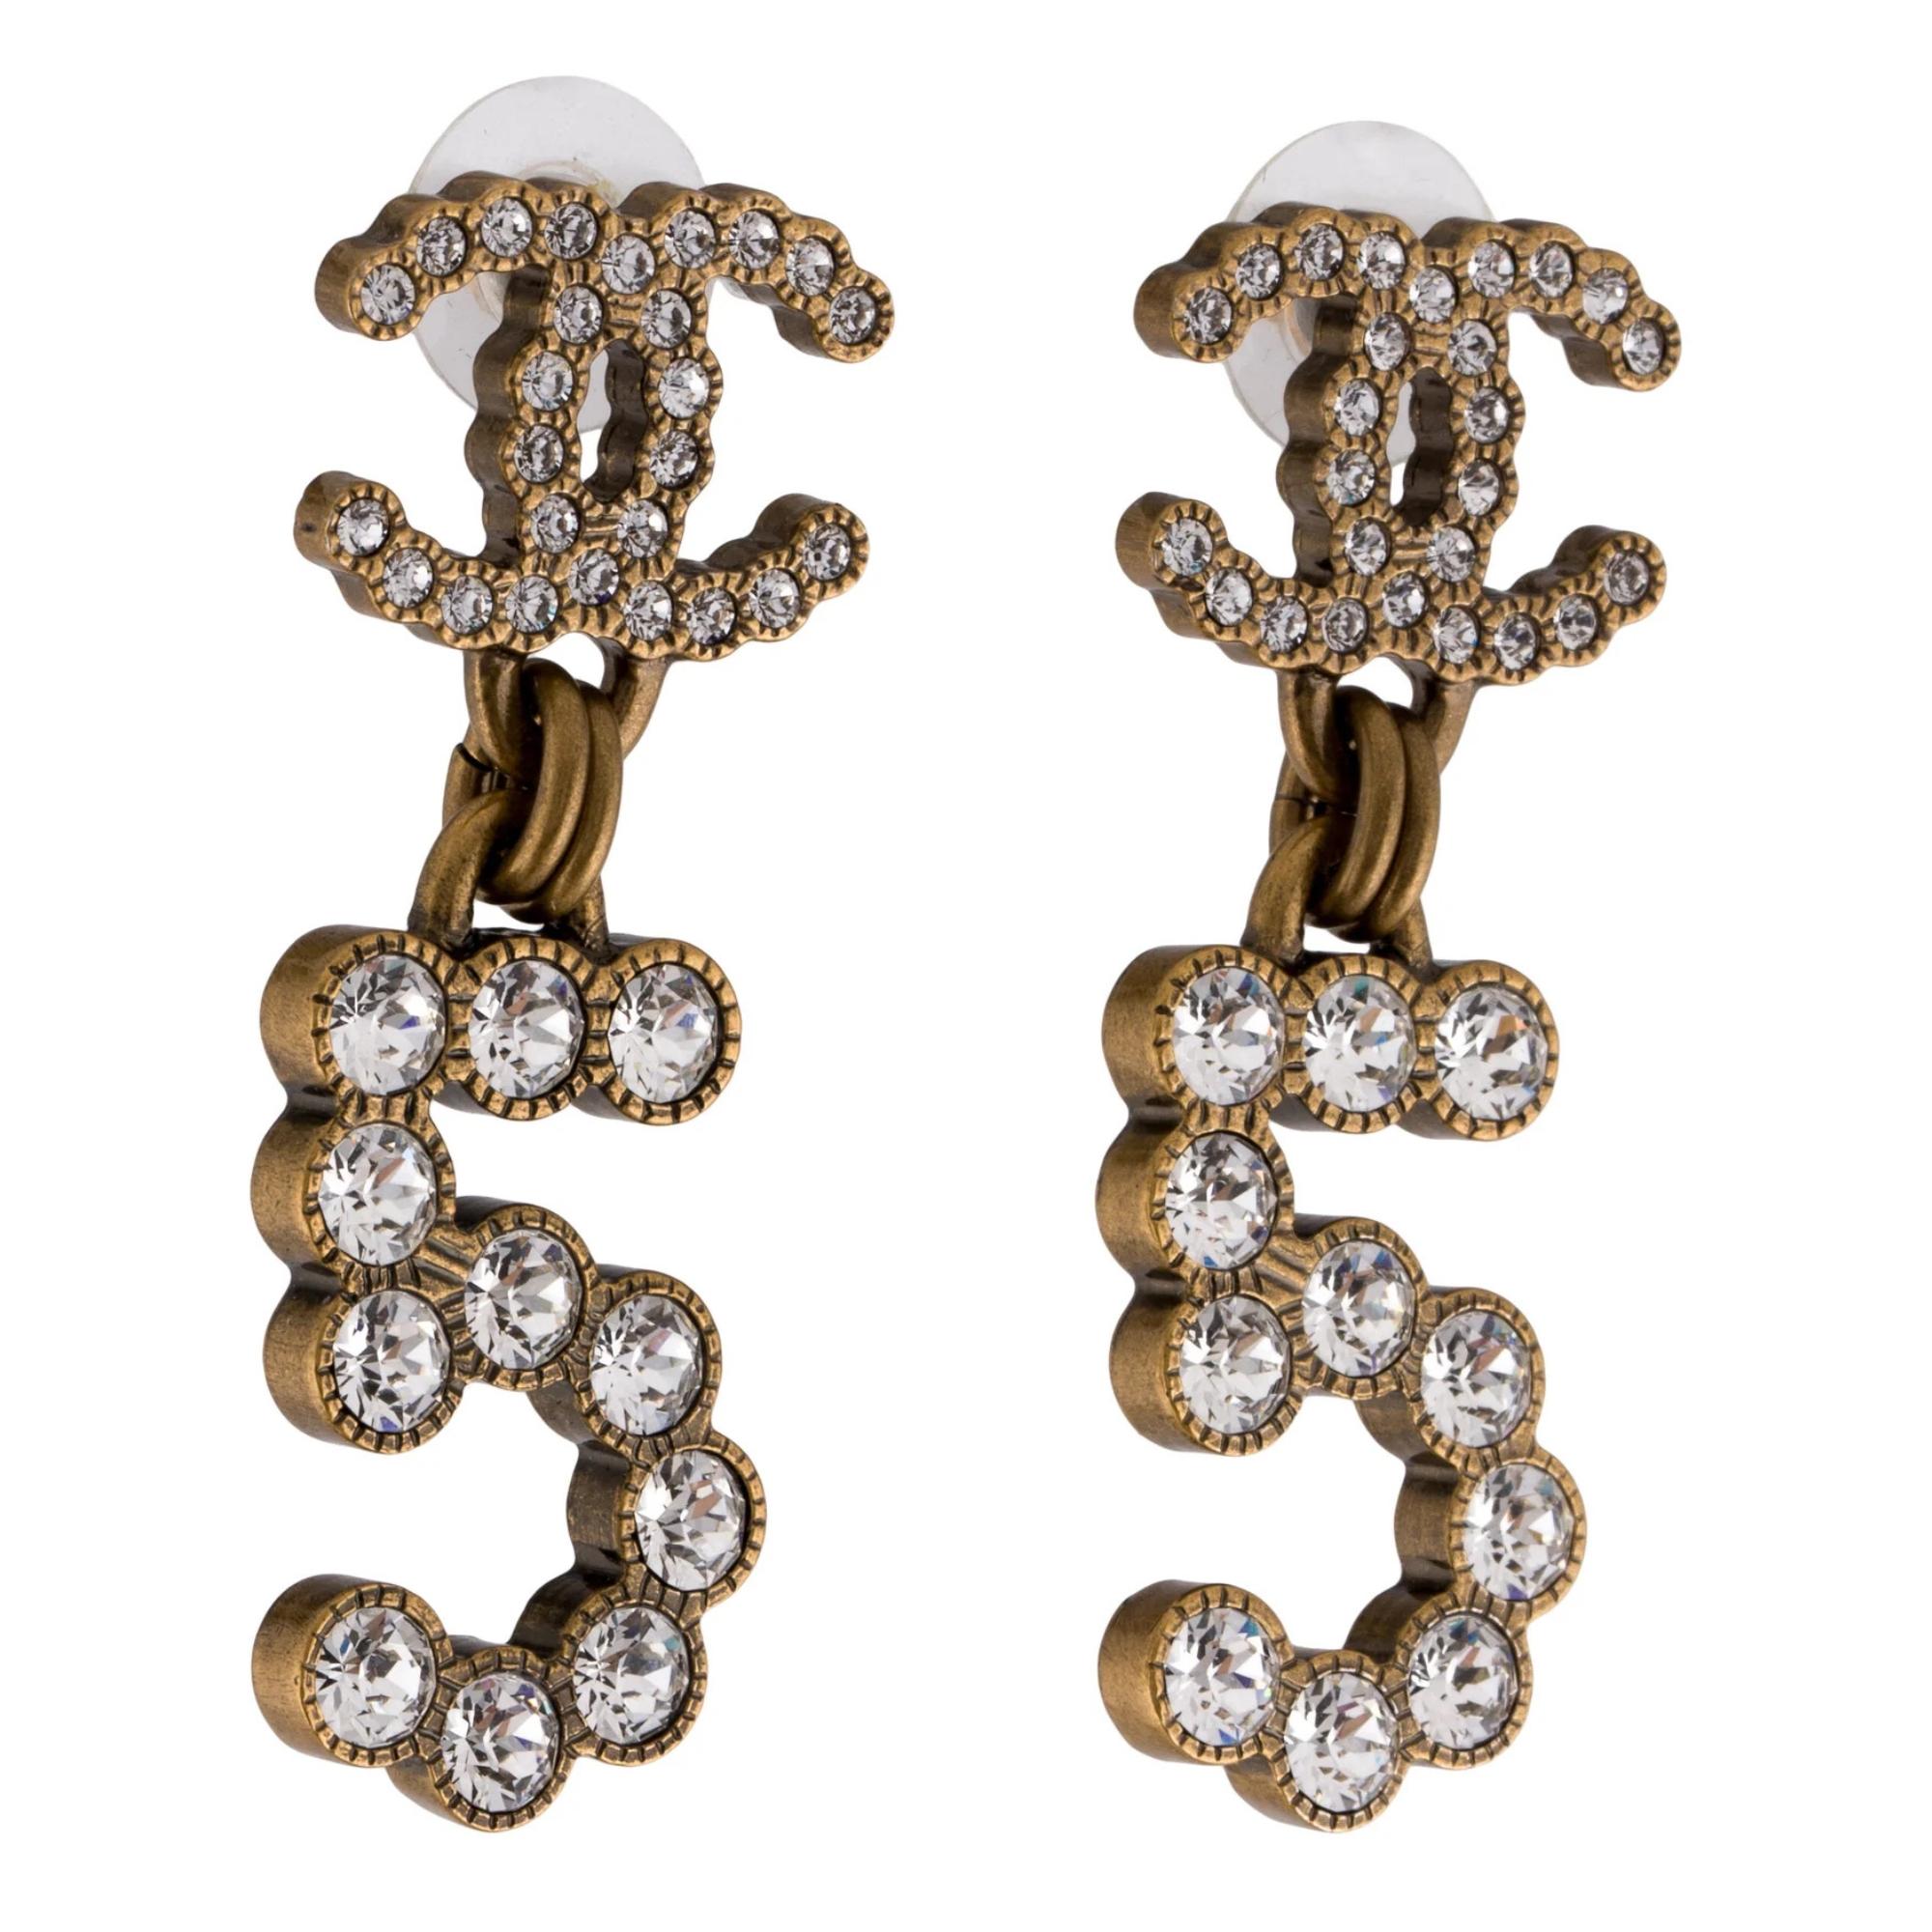 The earrings feature an antiqued gold tone finish, strass and a handing °5 pendant. The earrings clip on for the CC logo clasp. From the Spring/Summer 2020 Collection by Virginie Viard.

Antiqued-gold-tone Metal & Strass.
Marks: Designer Signature,